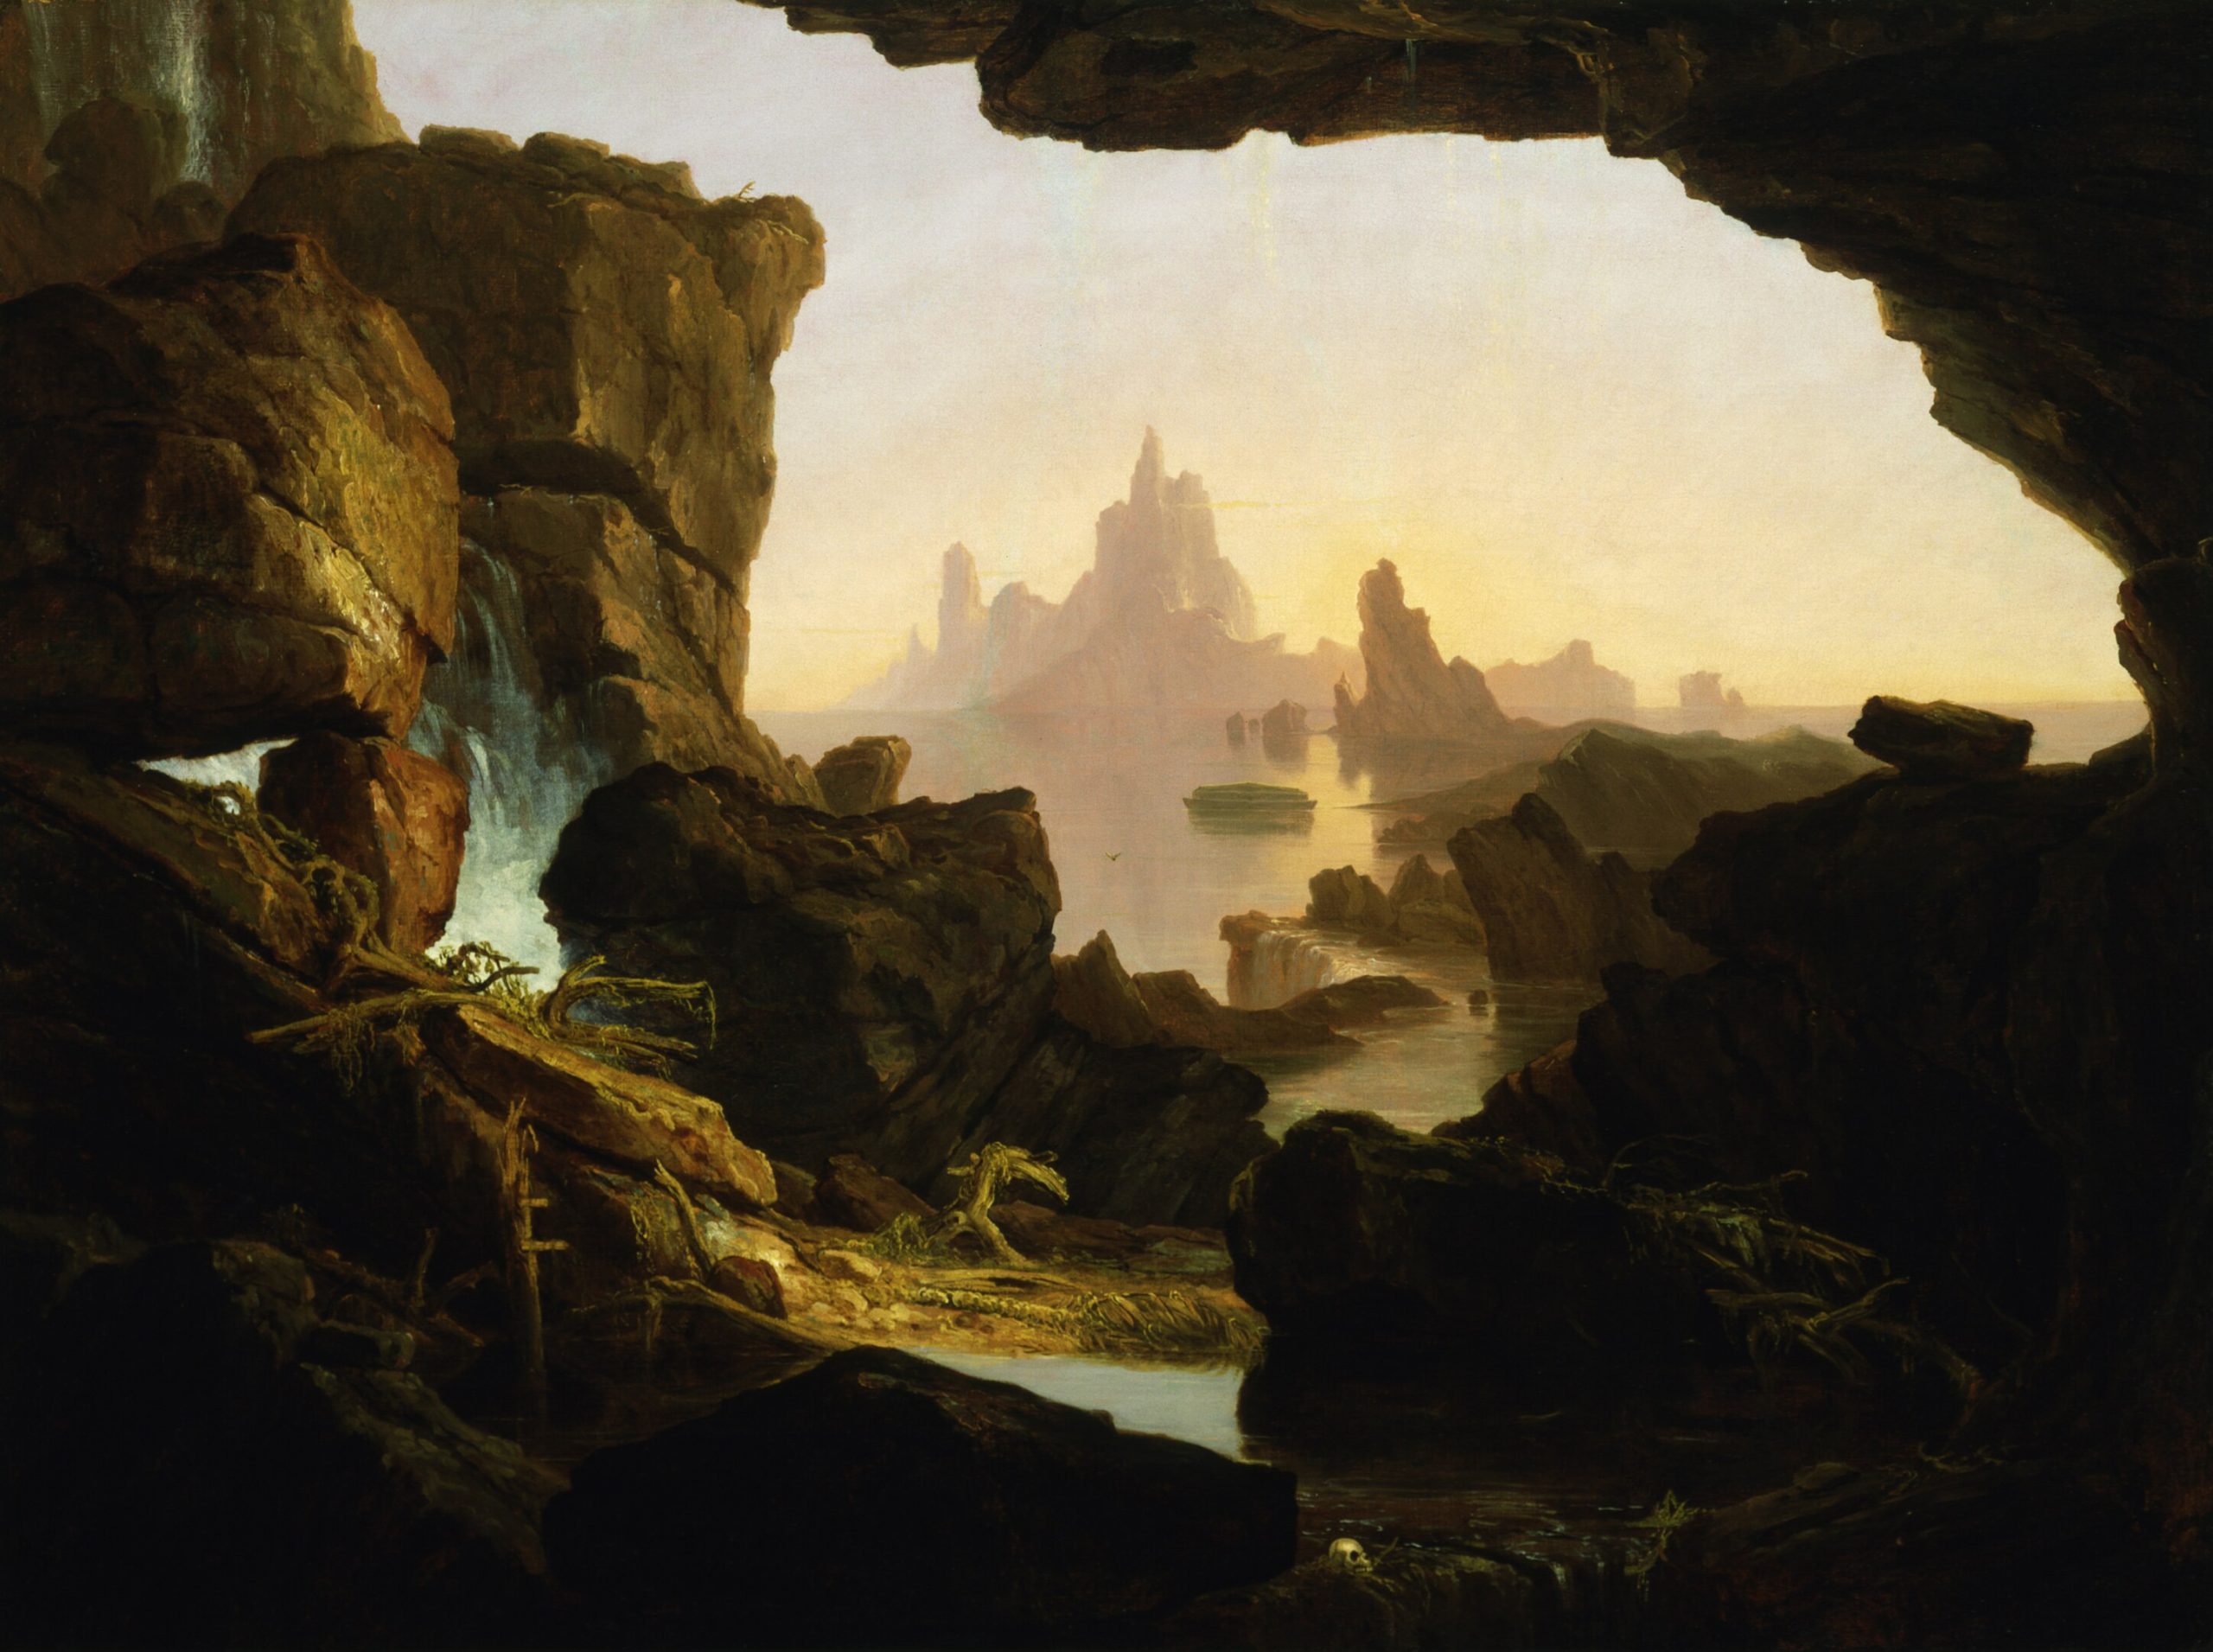 A landscape view of canyons